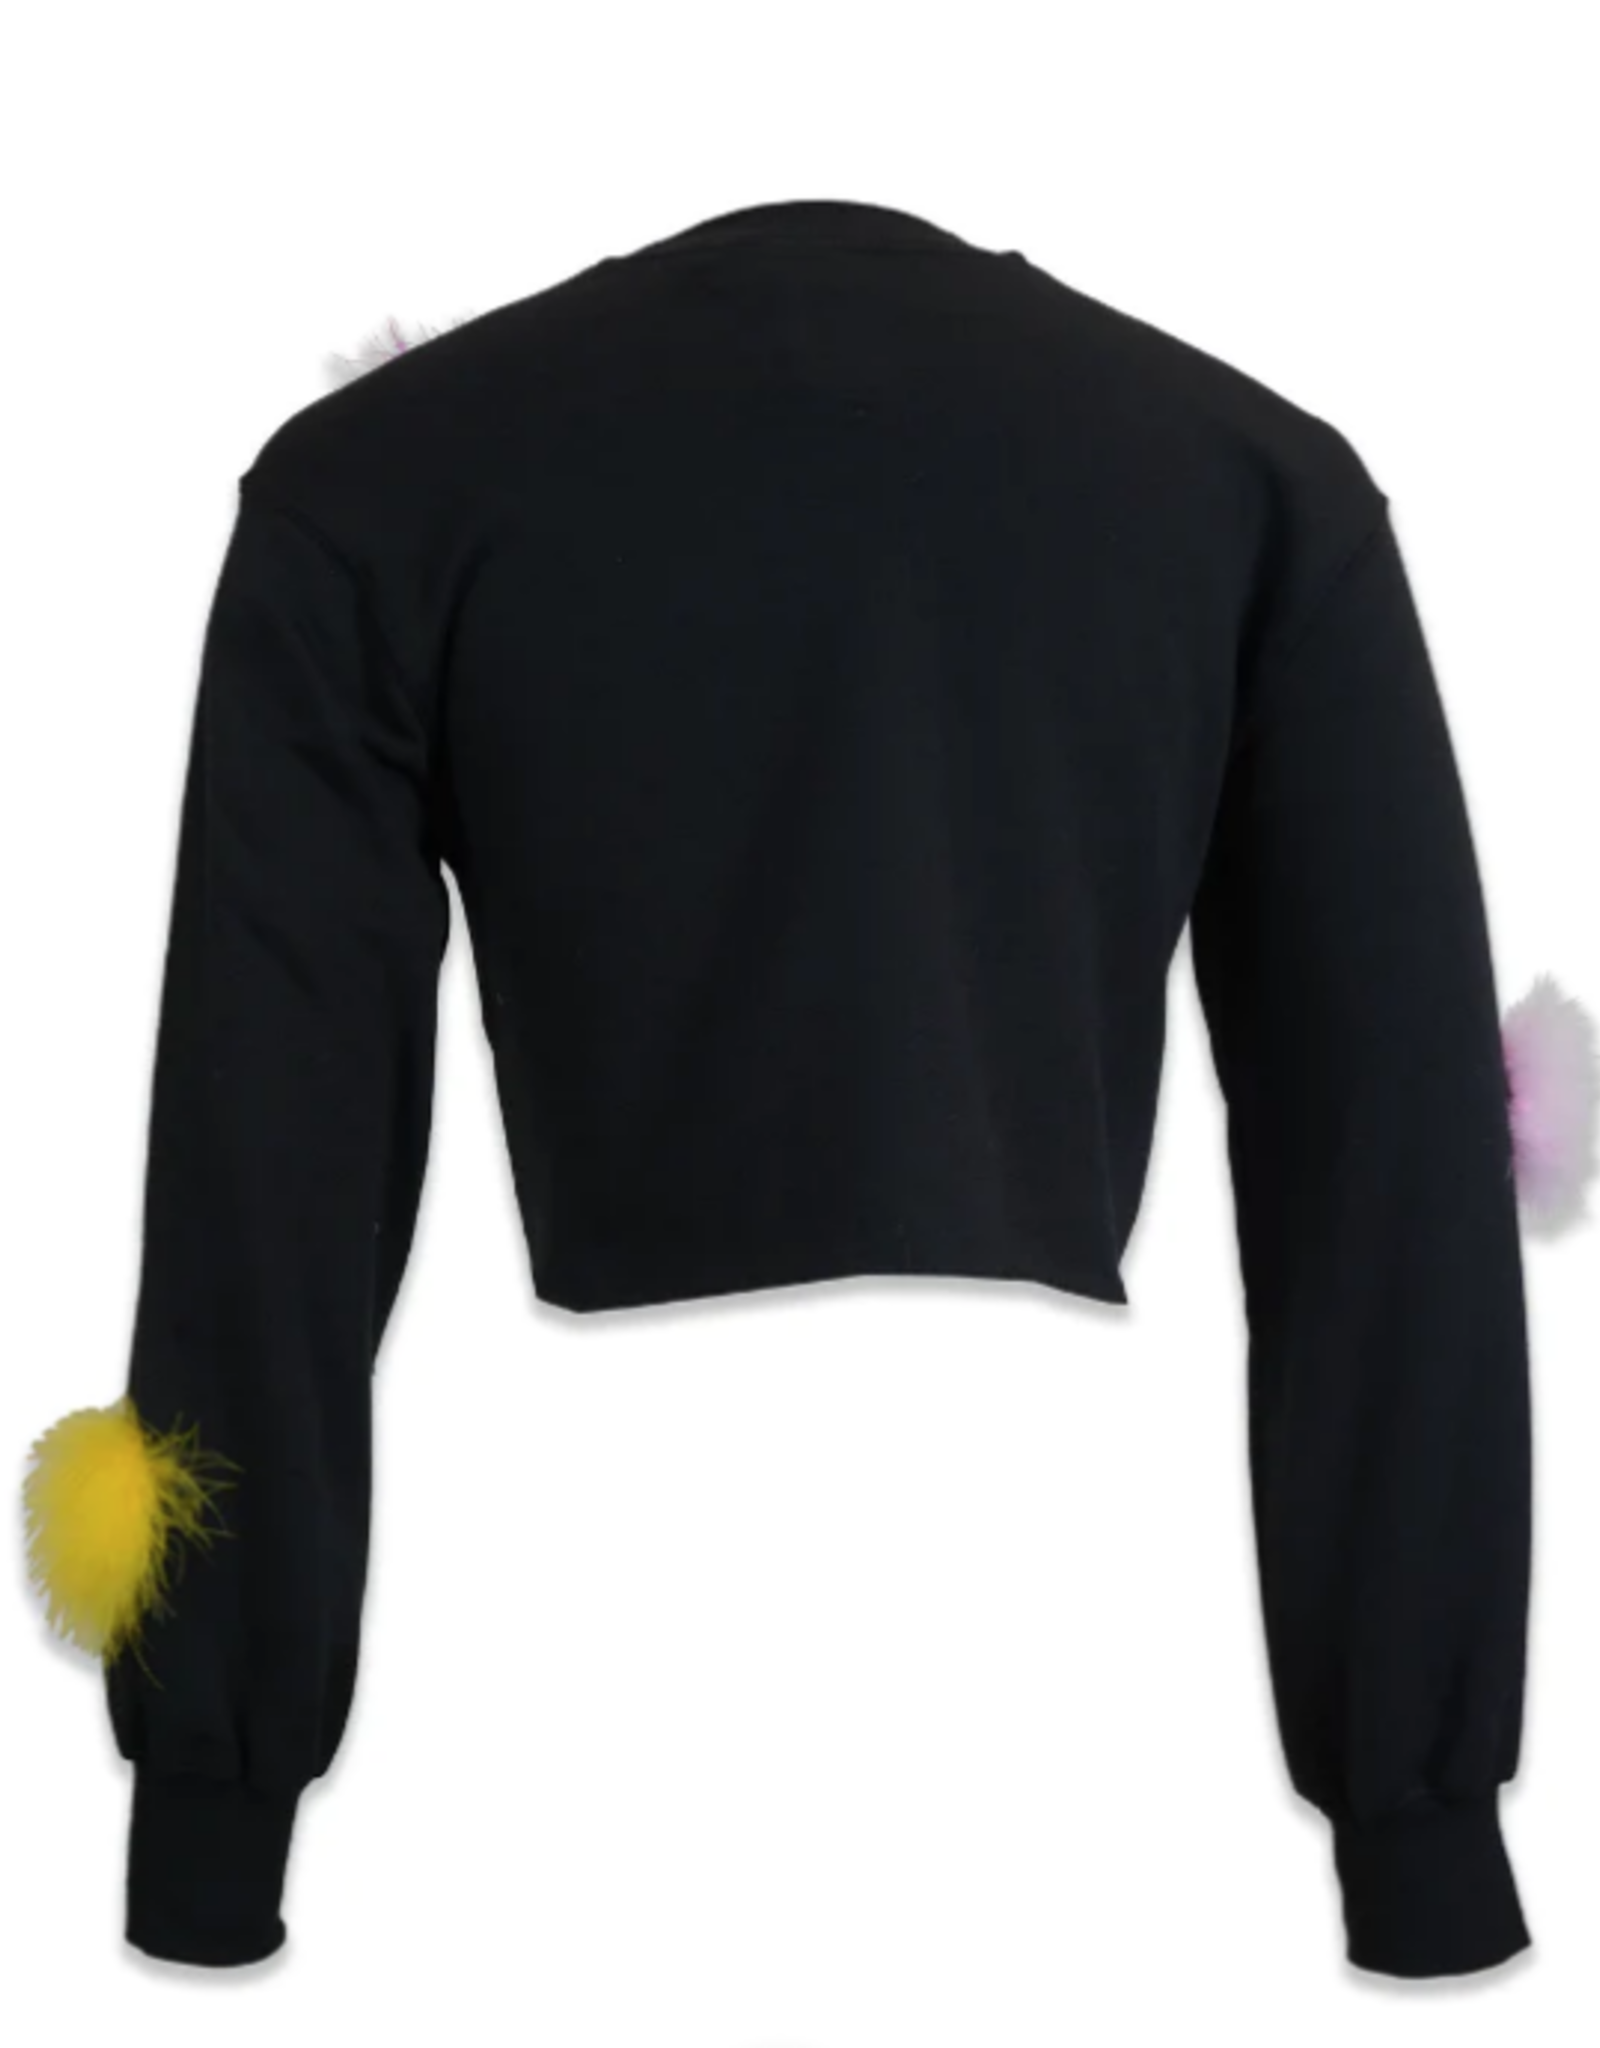 HOUSE OF PERNA Constance Pom Sweat Top